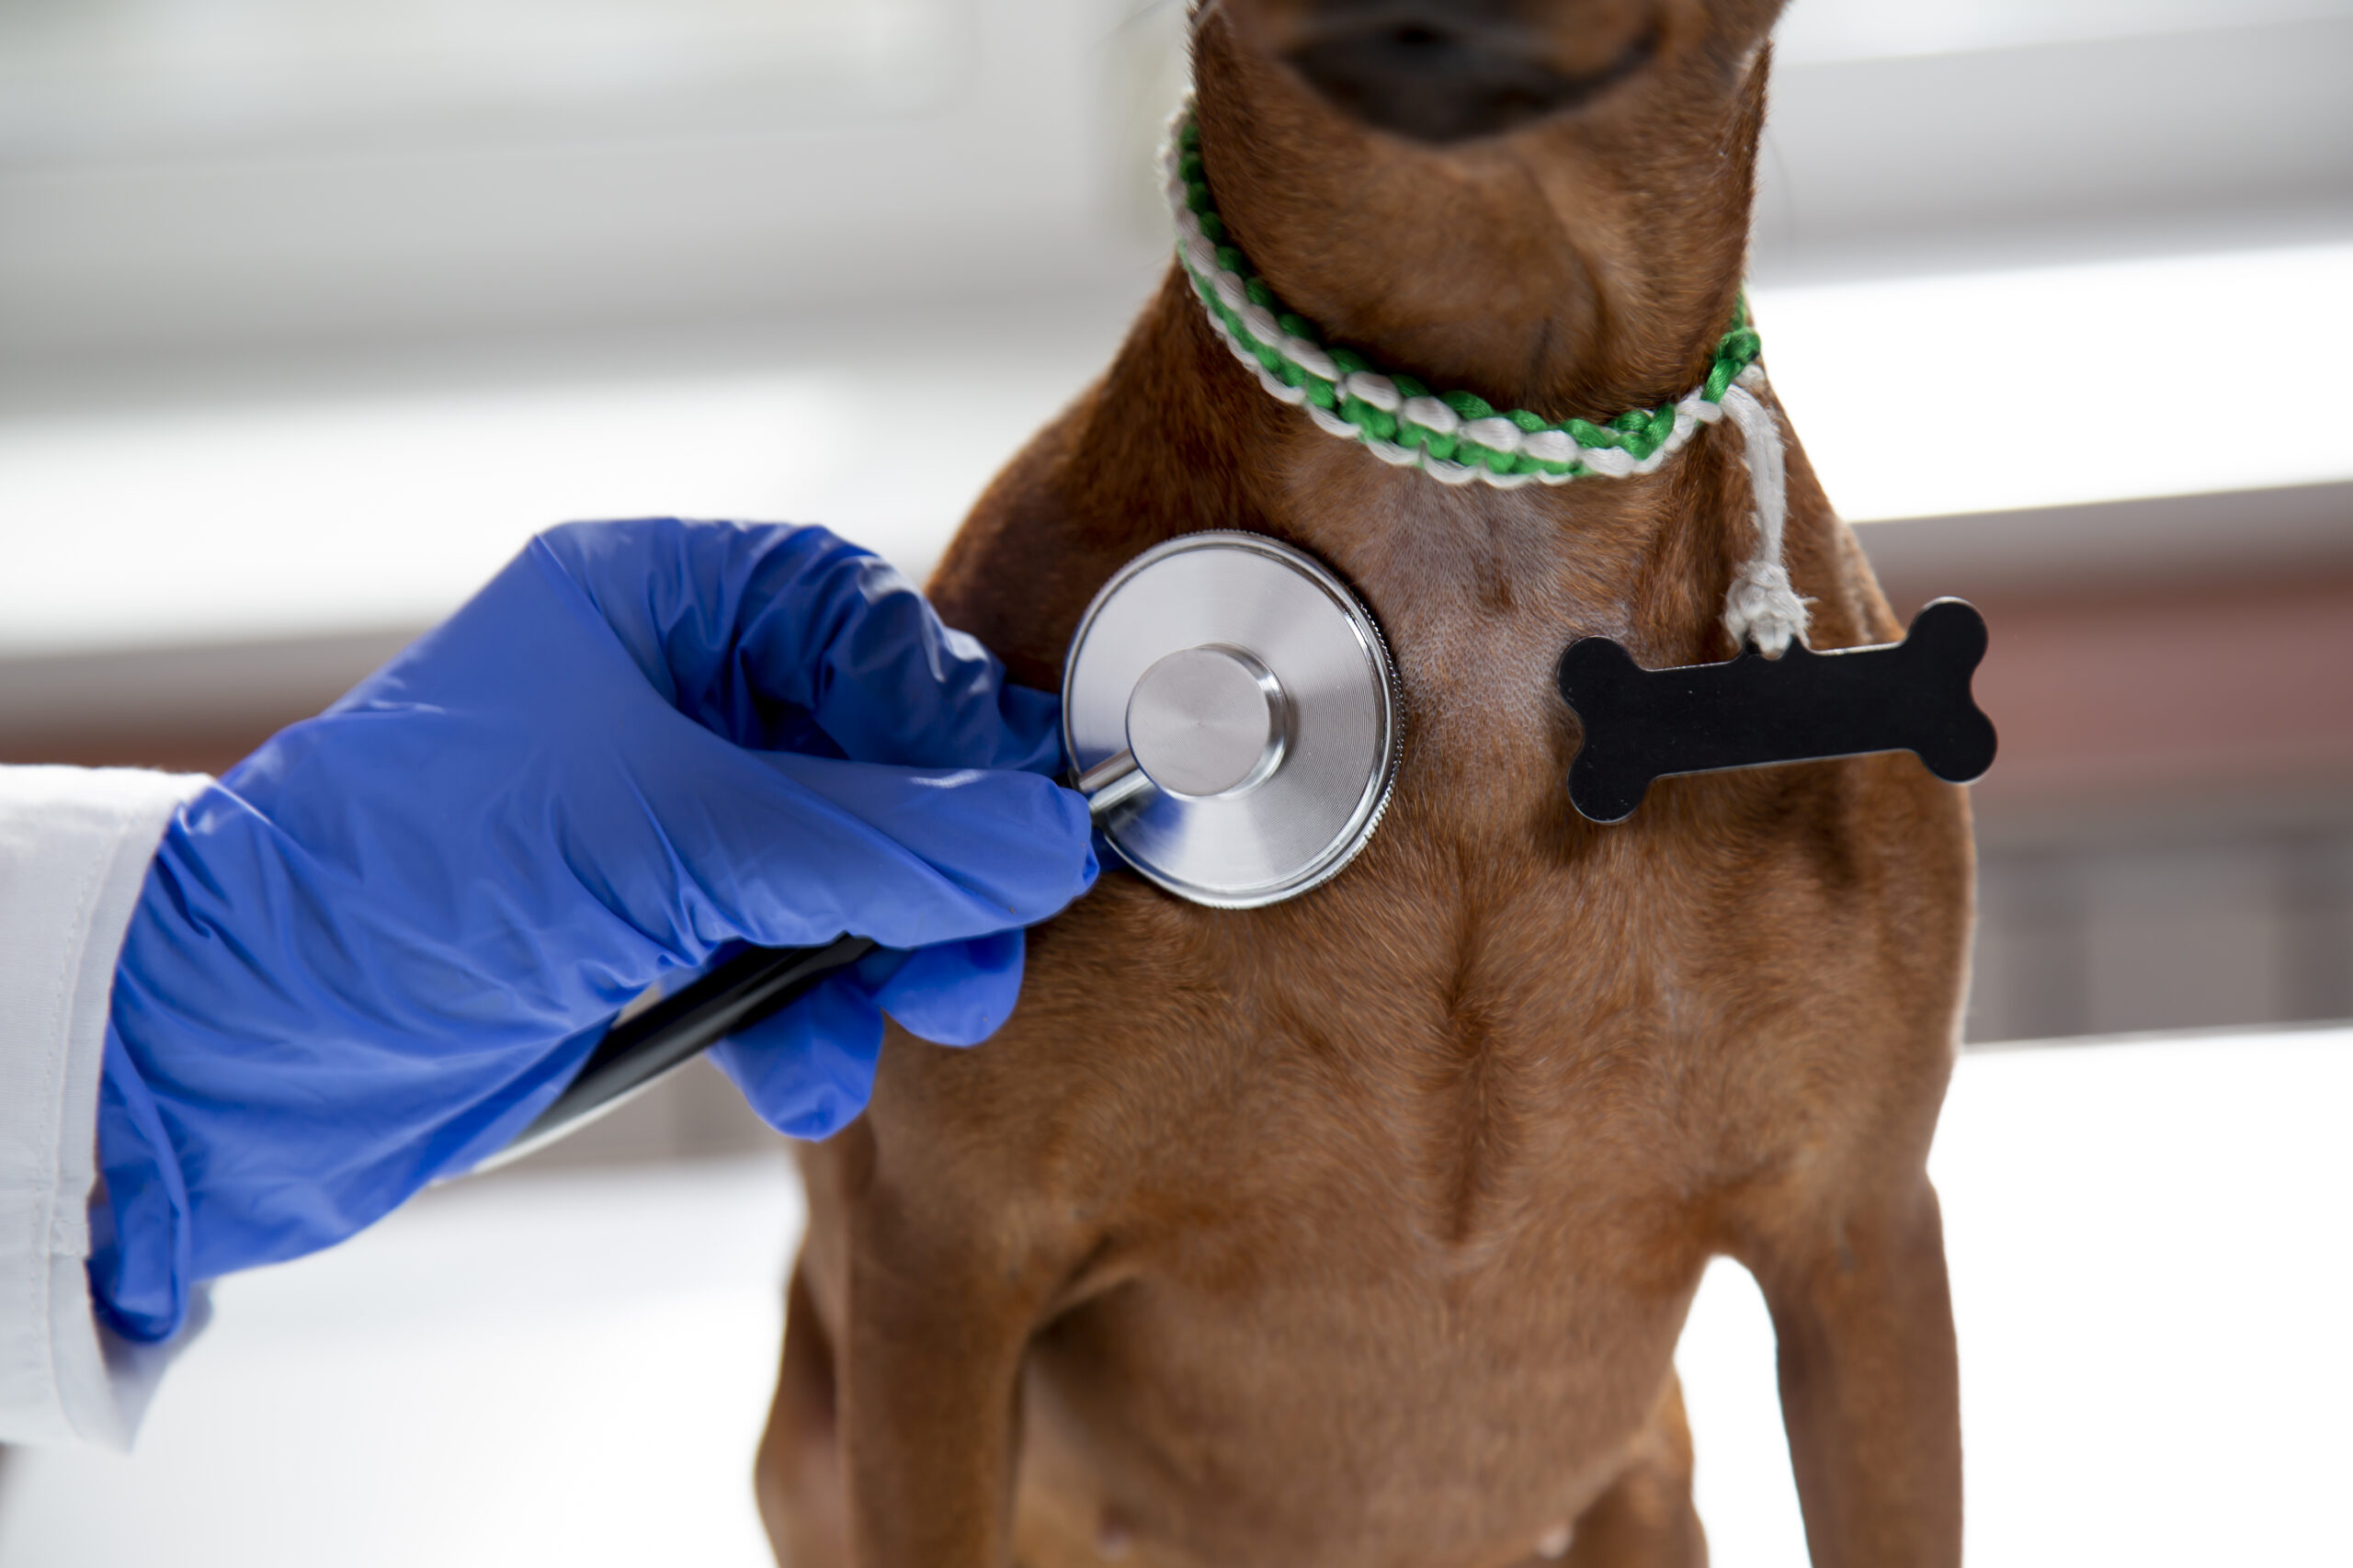 The doctor uses a stethoscope to listen to the pet's breathing.